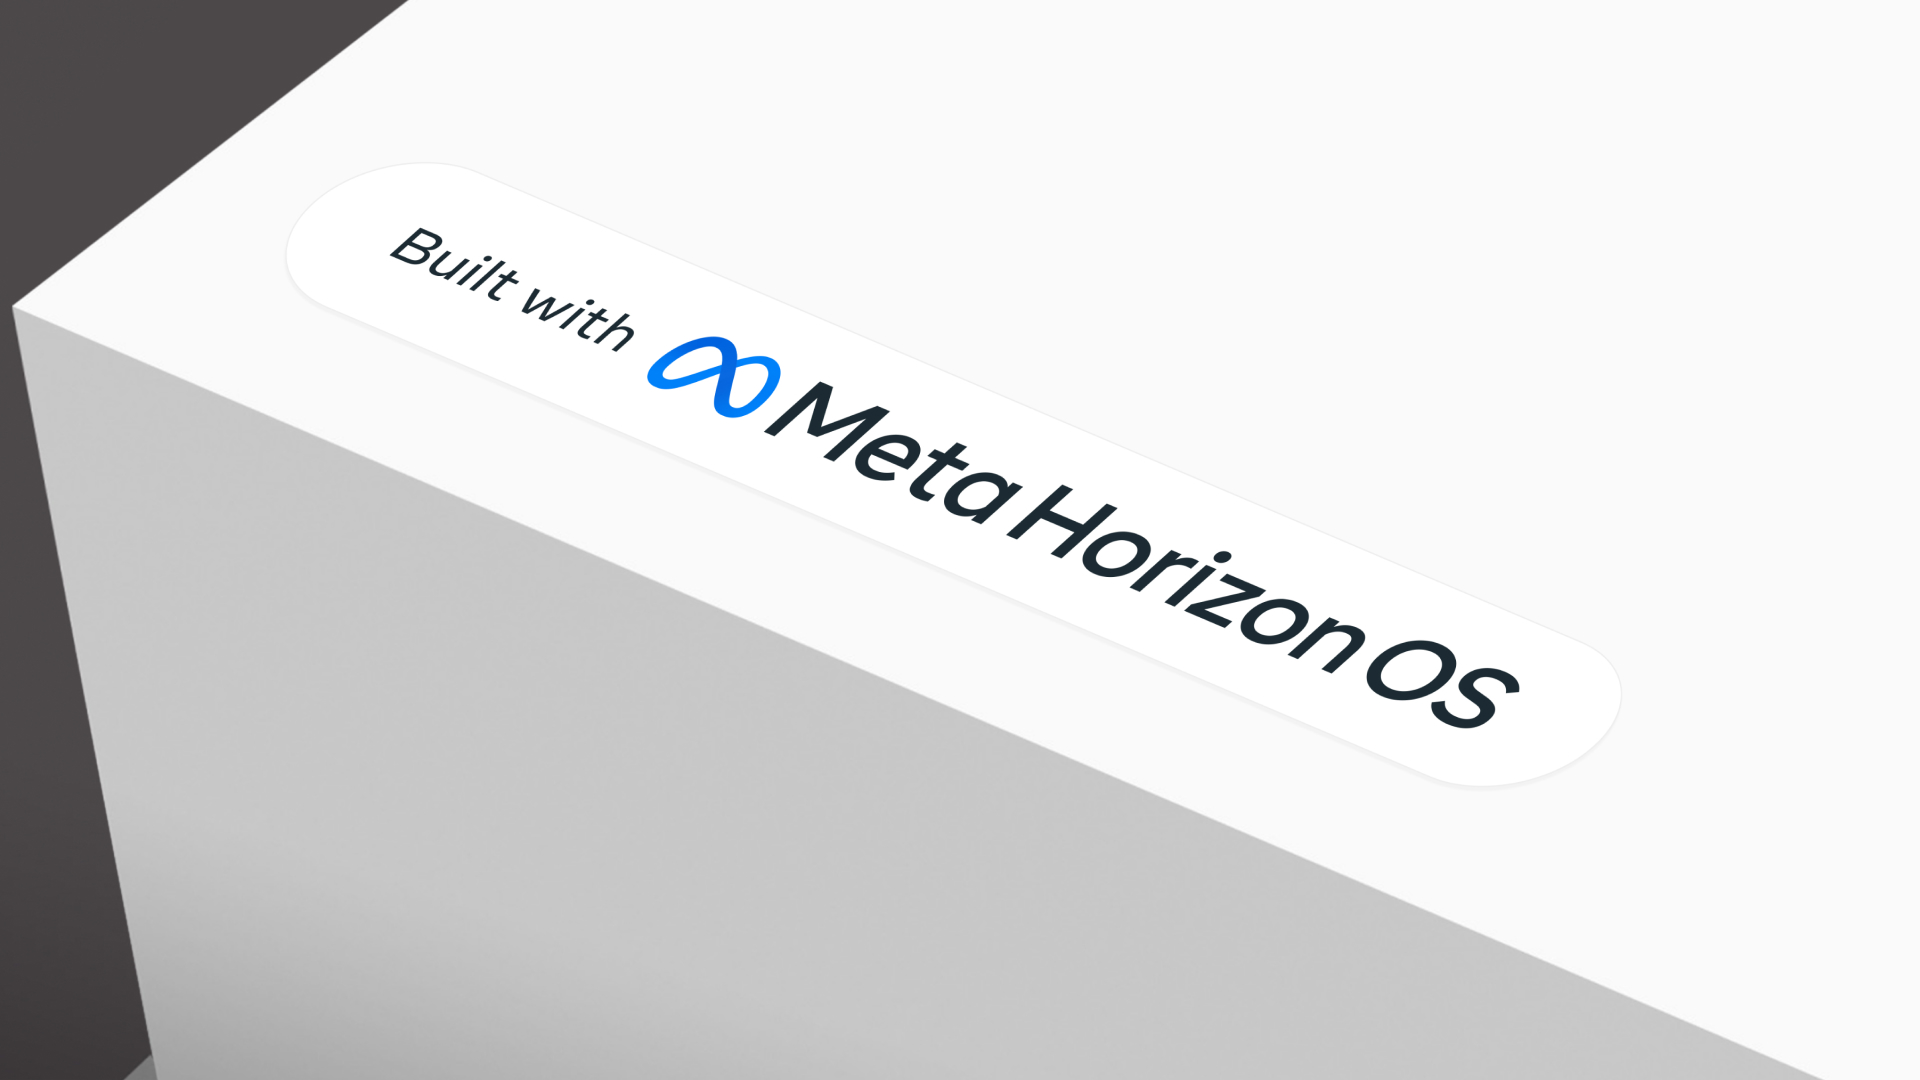 Image showing a box labeled "Built with Meta Horizon OS"